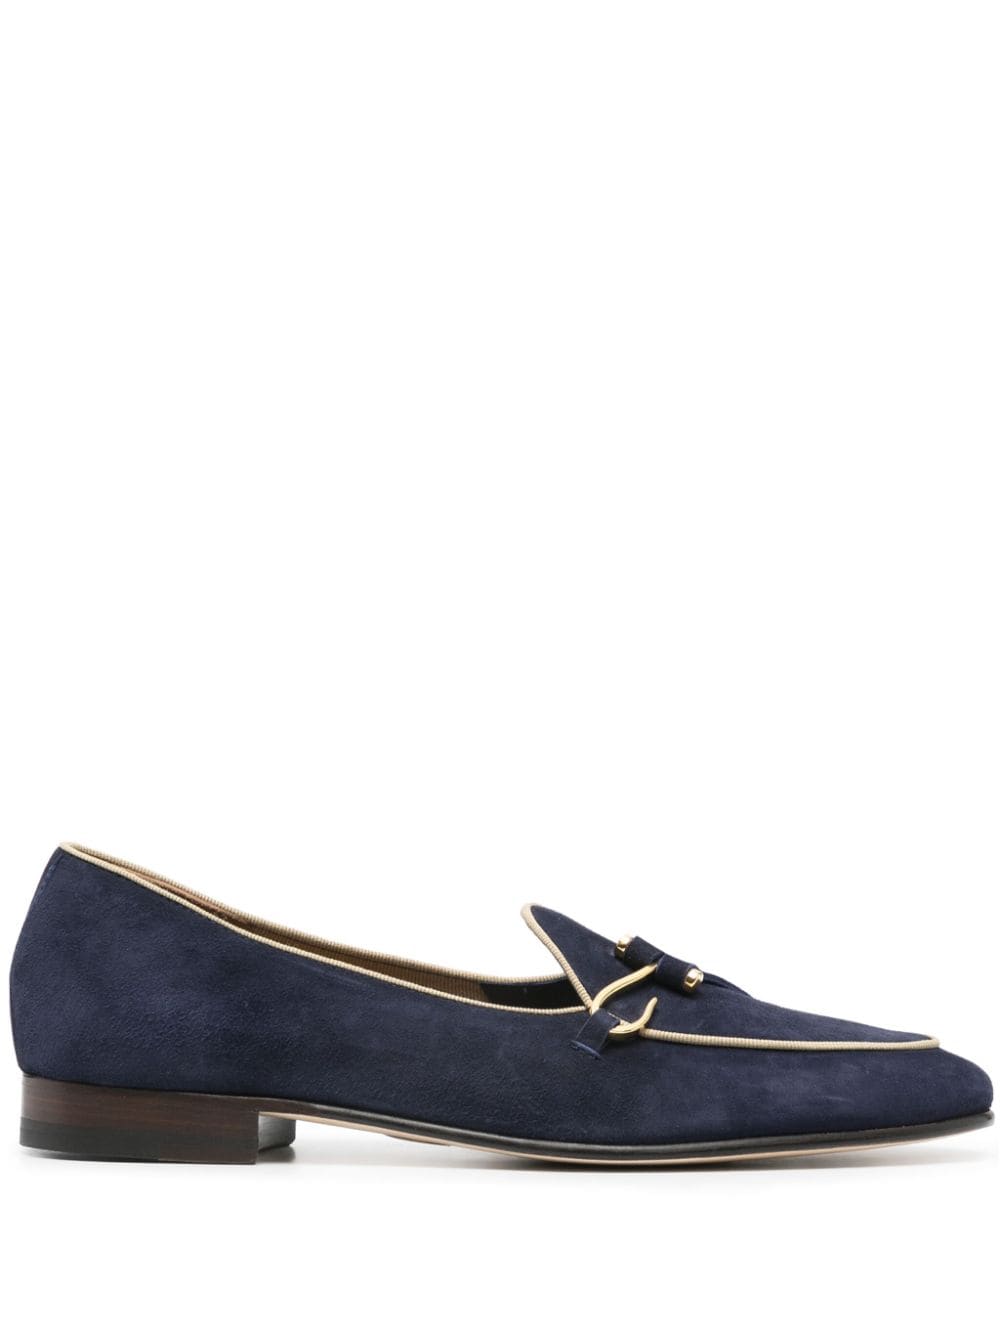 Comporta suede loafers